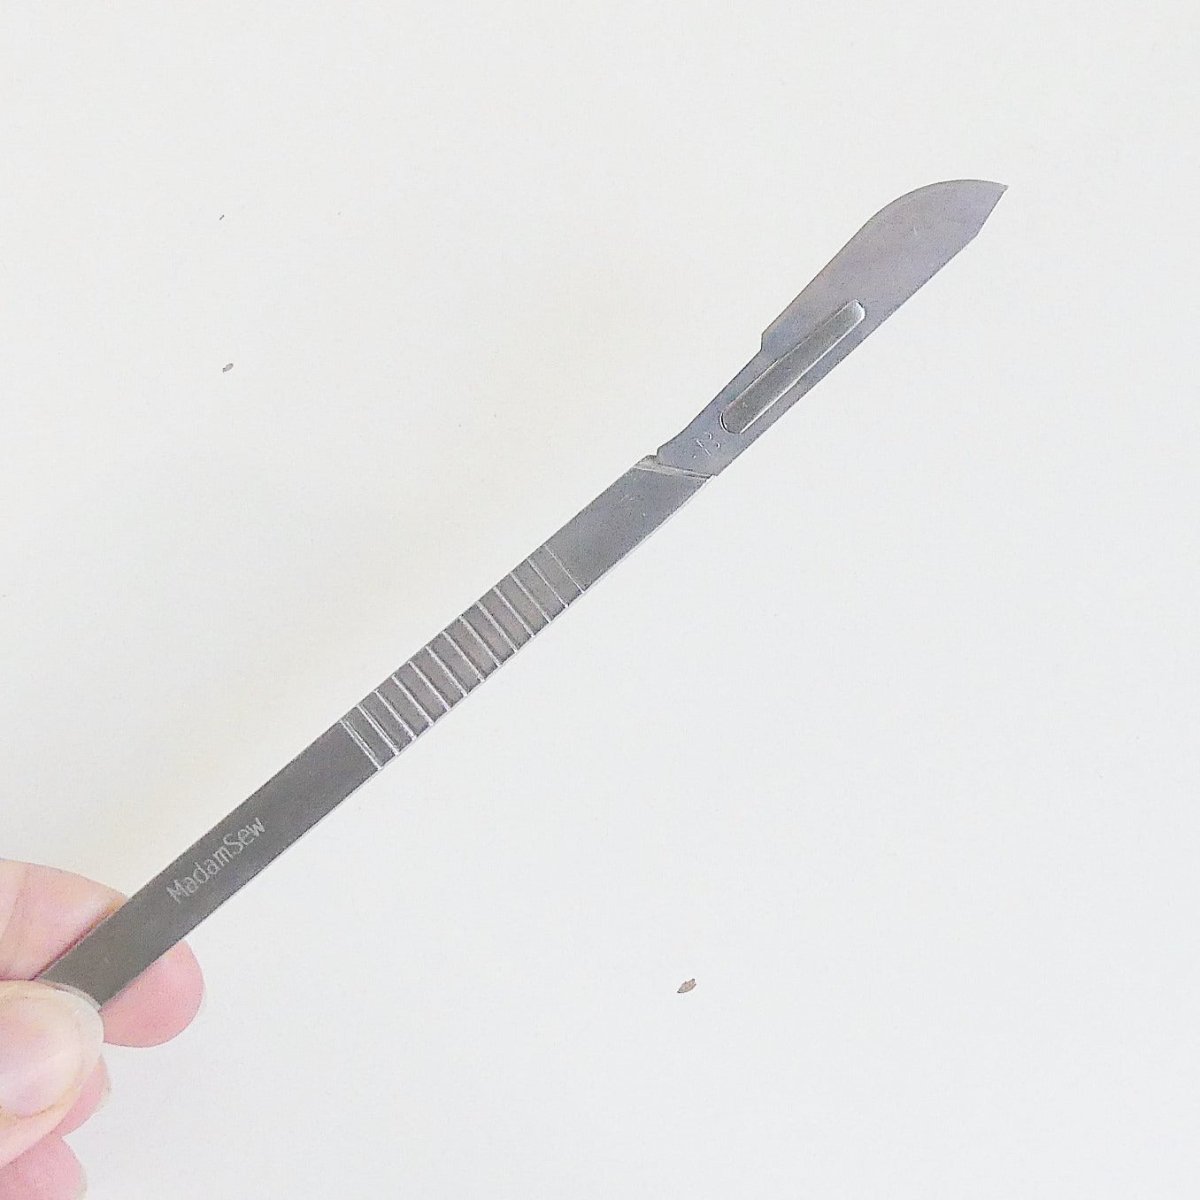 A hand holding the thread knife of the bird nest toolkit with a new blade attached